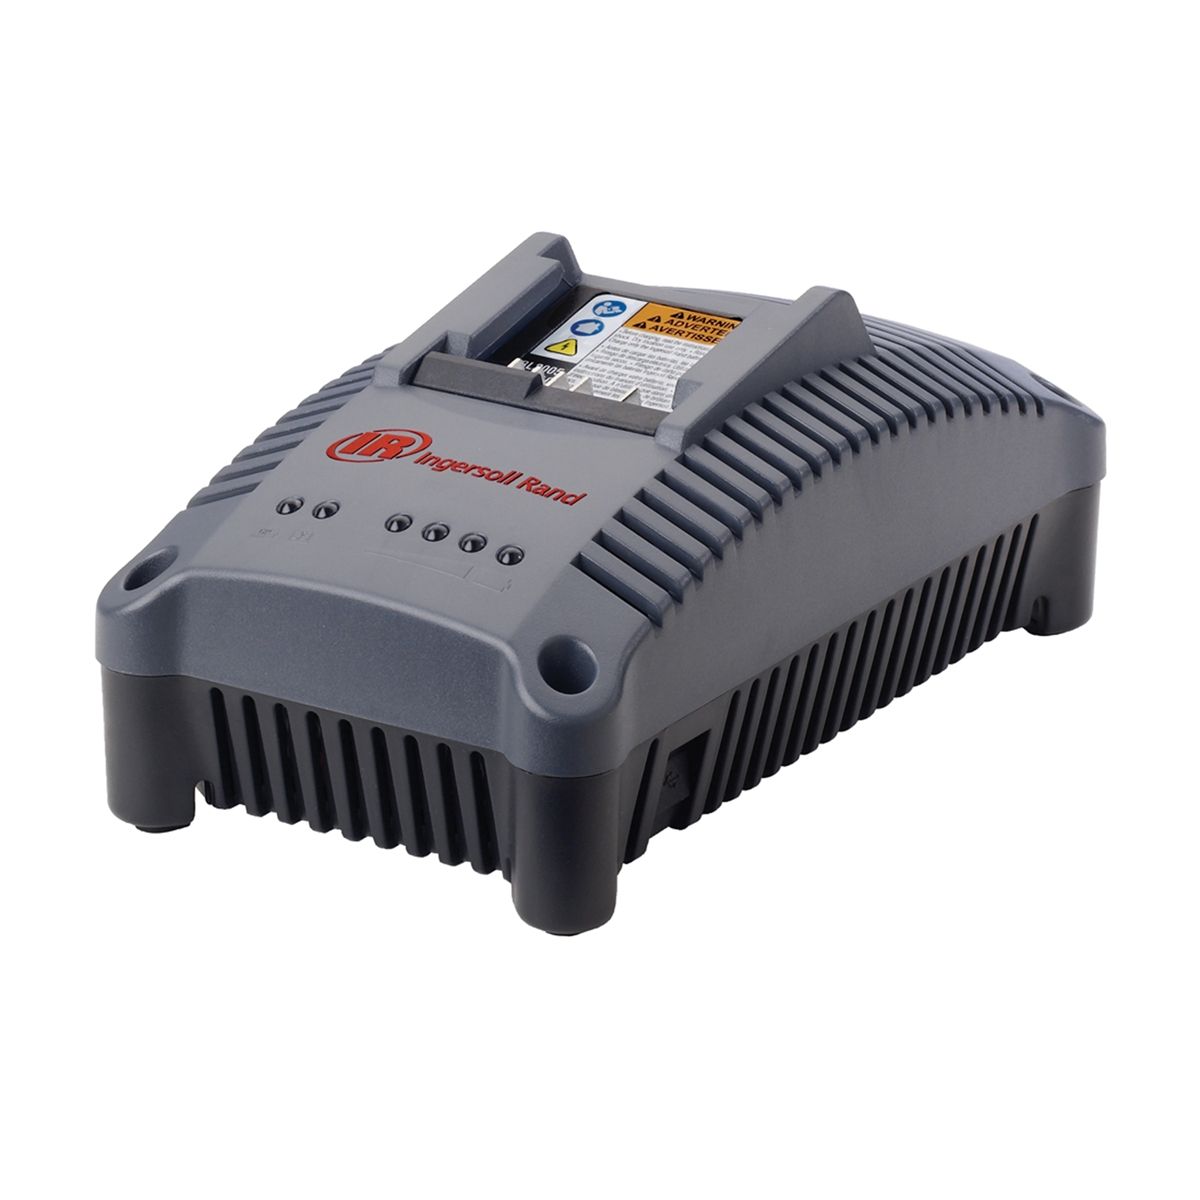 IQv20 Series 20 Volt Battery Charger